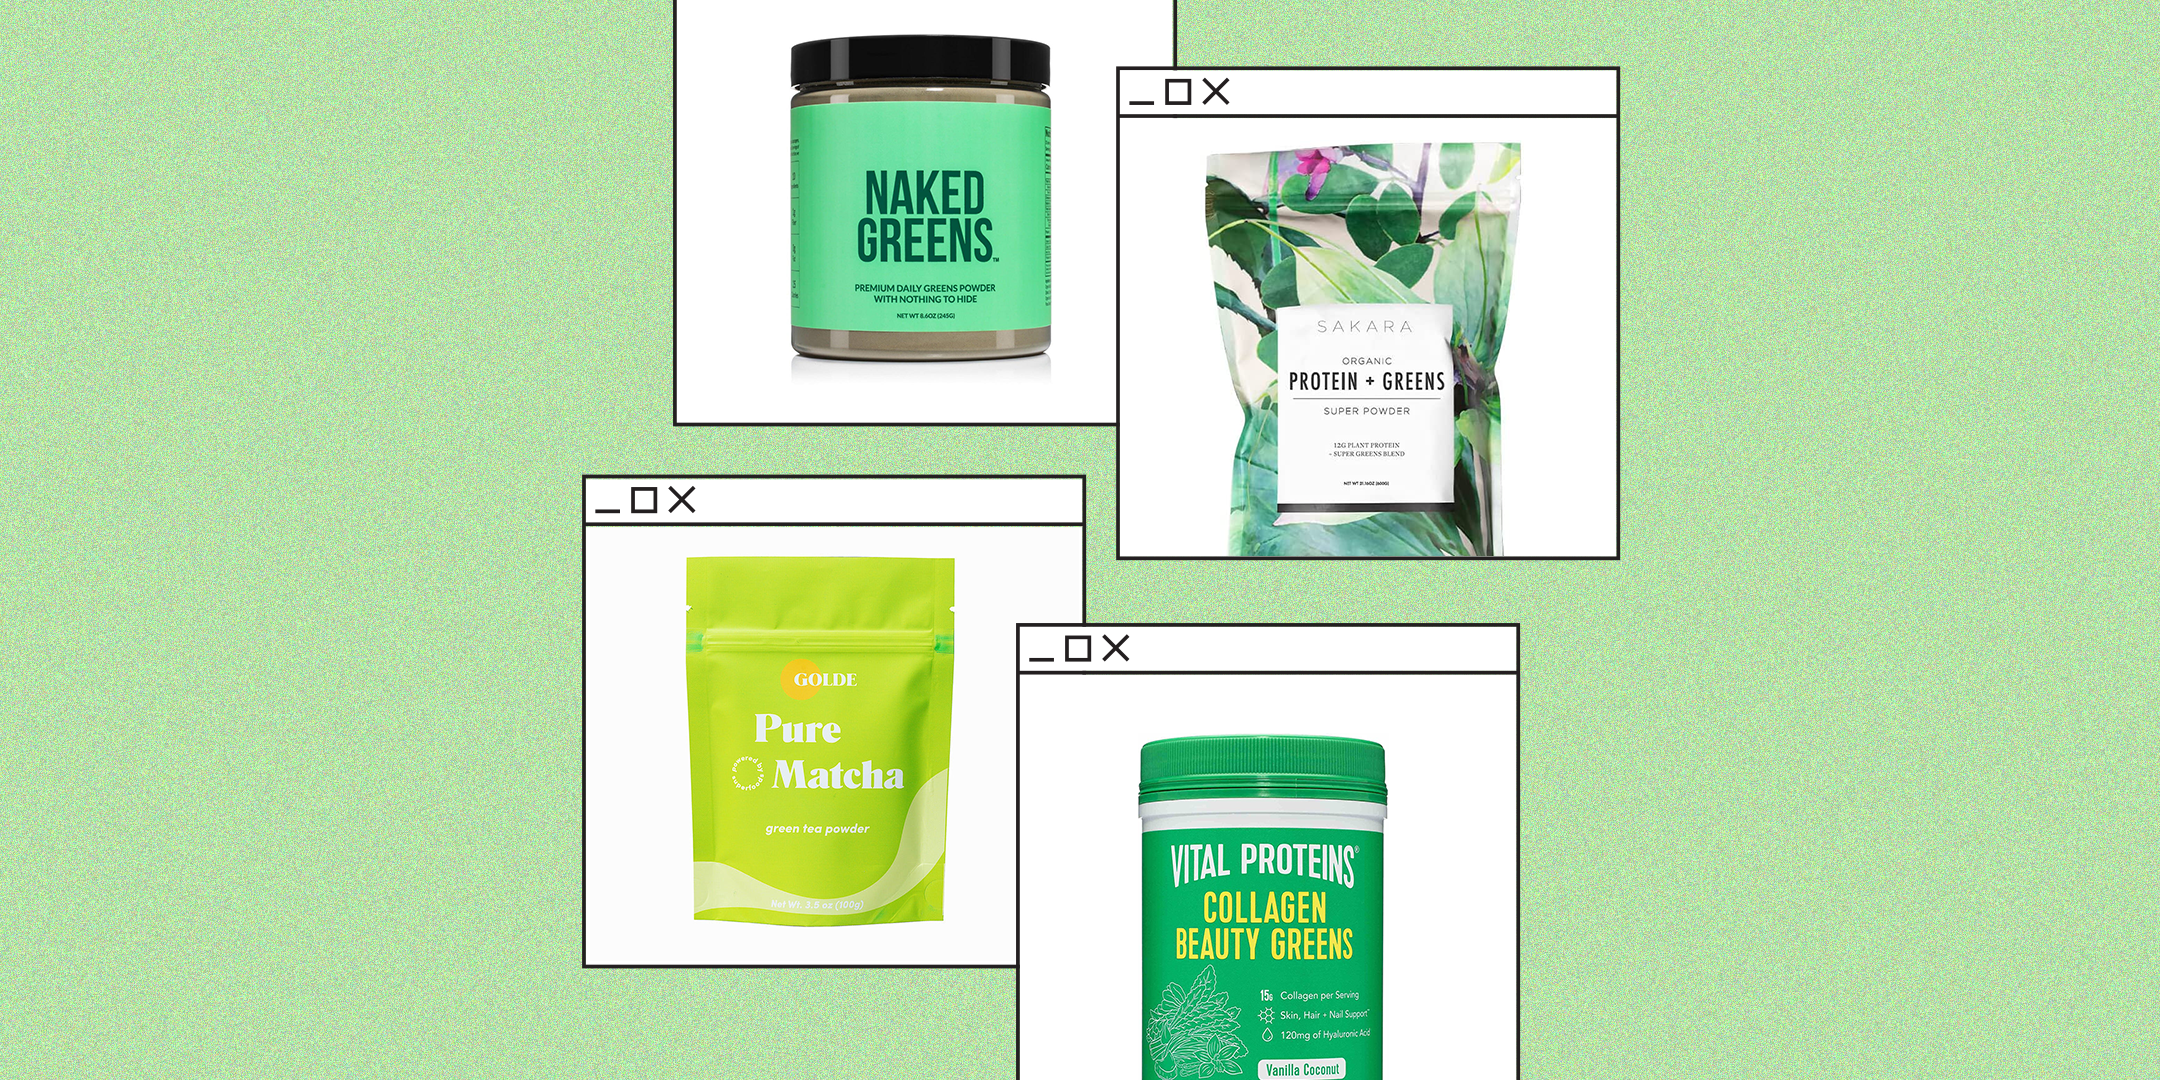 The Best Greens Powder Is the One You'll Actually Want to Drink